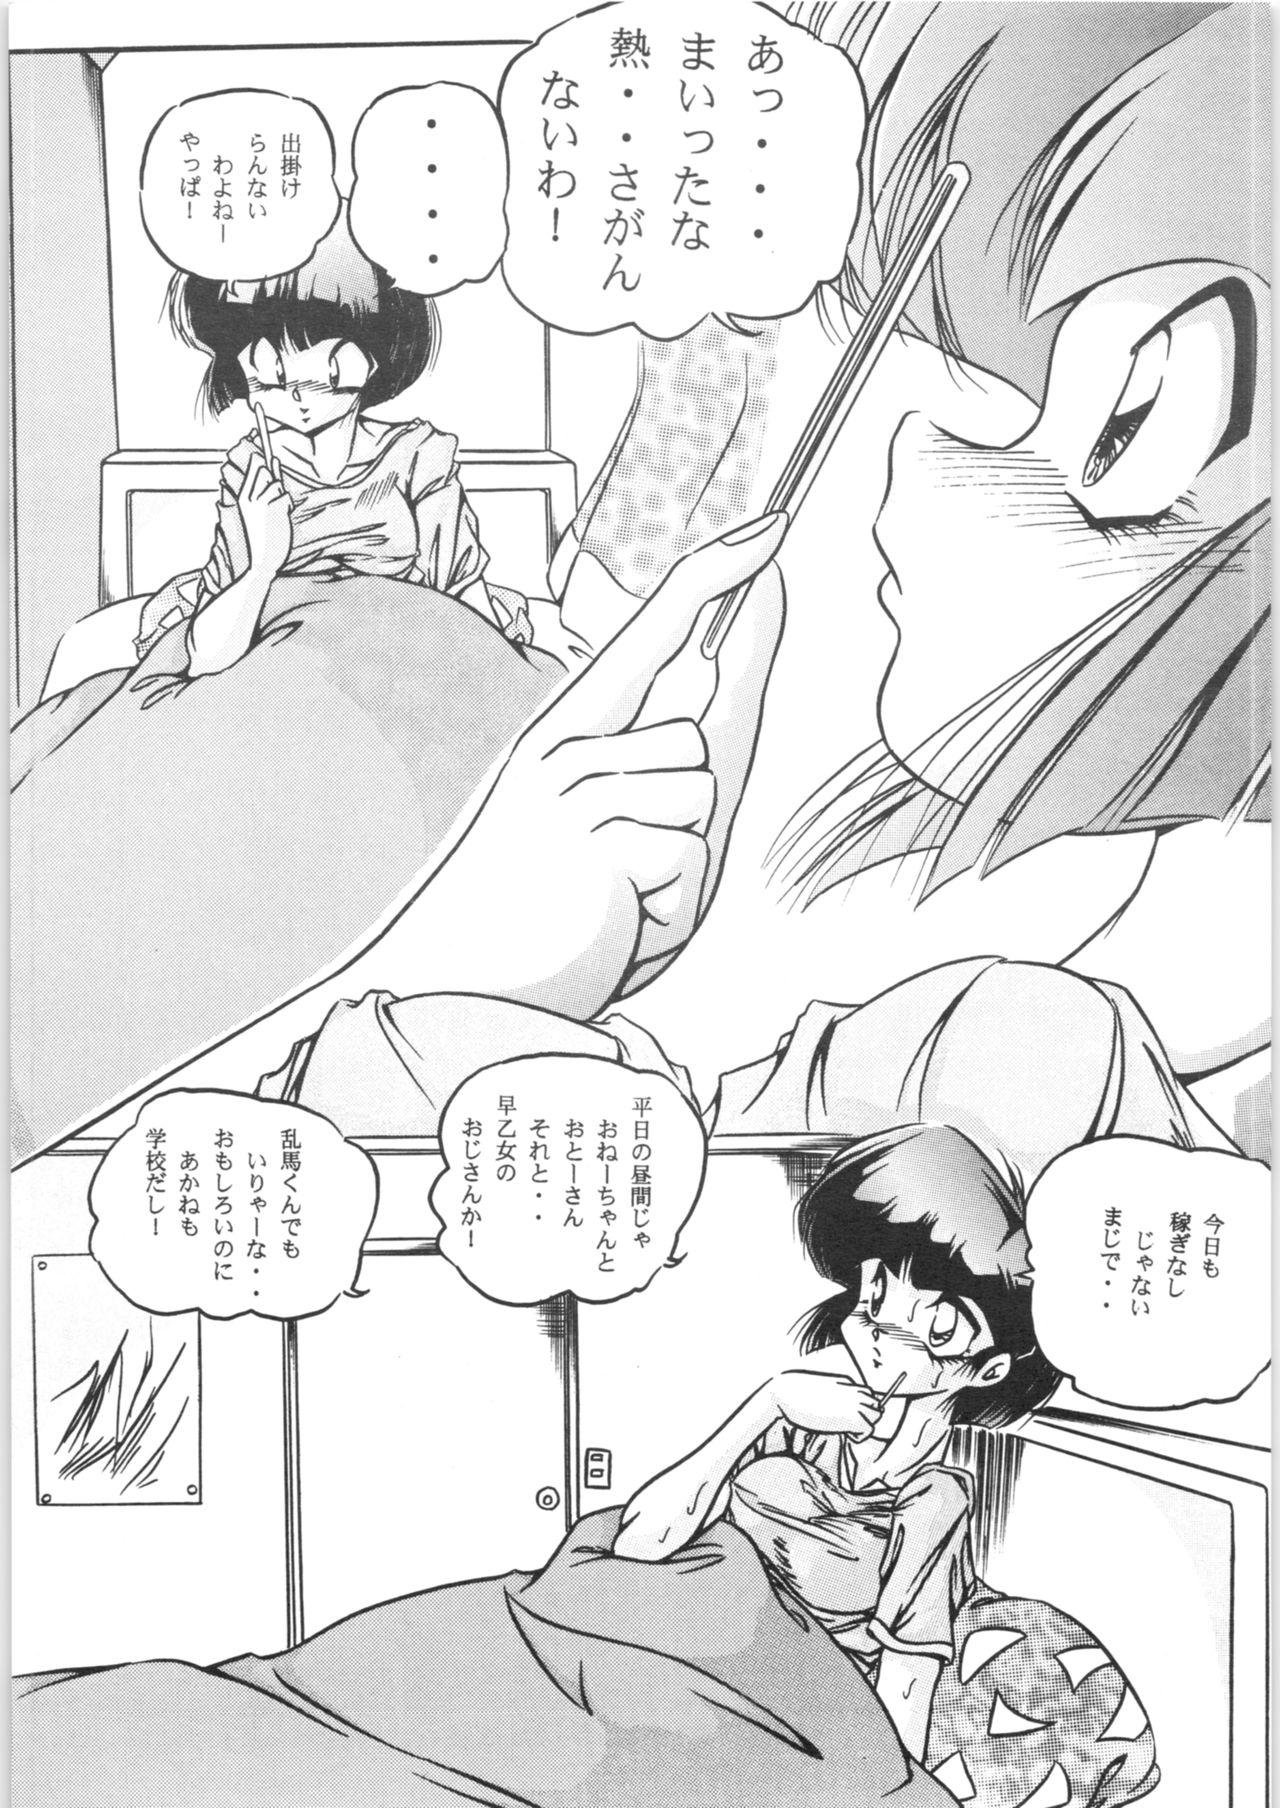 Collar C-COMPANY SPECIAL STAGE 18 - Ranma 12 Idol project Hood - Page 8